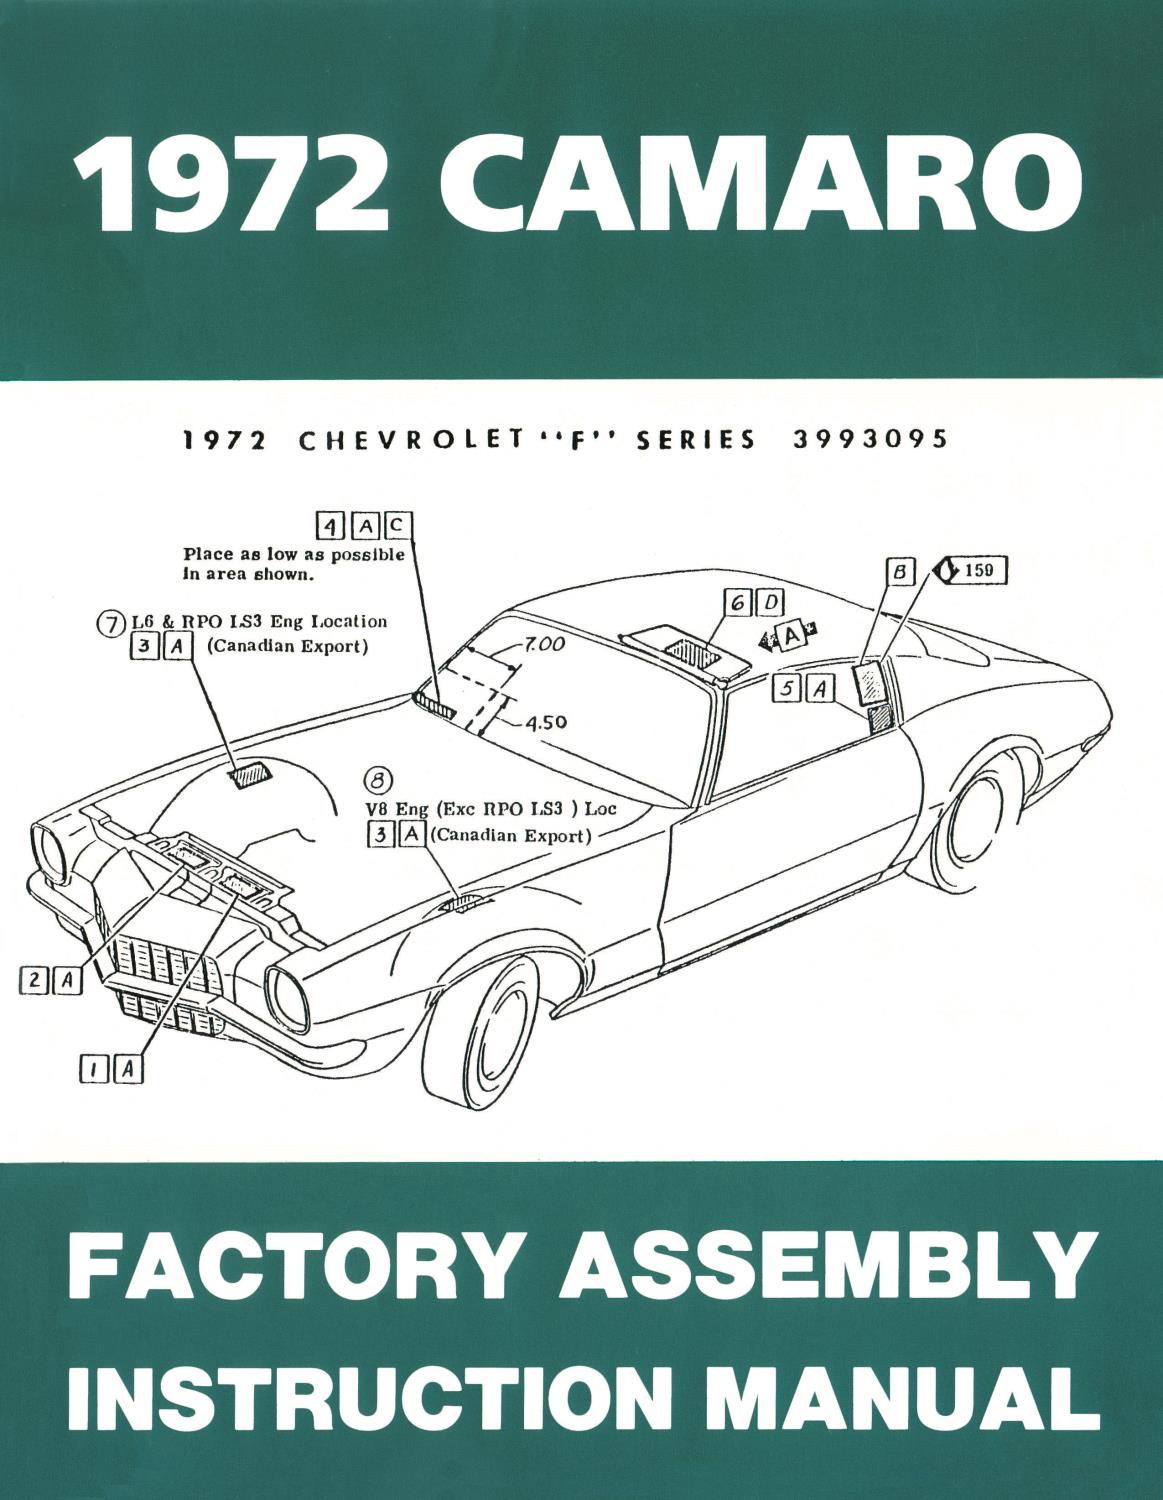 Factory Assembly Instruction Manual for 1972 Chevrolet Camaro